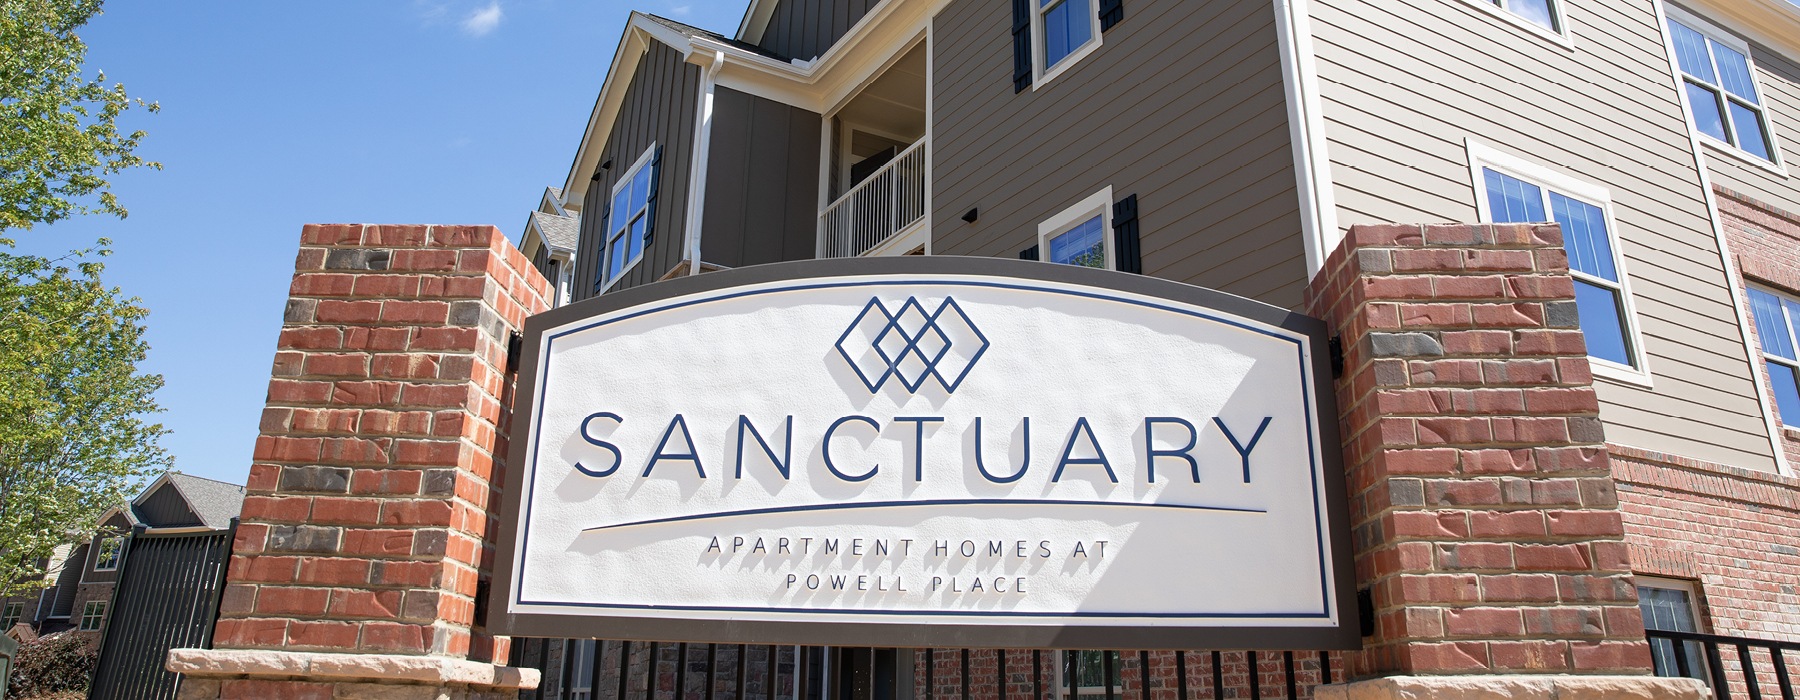 Sanctuary at Powell Place apartment sign